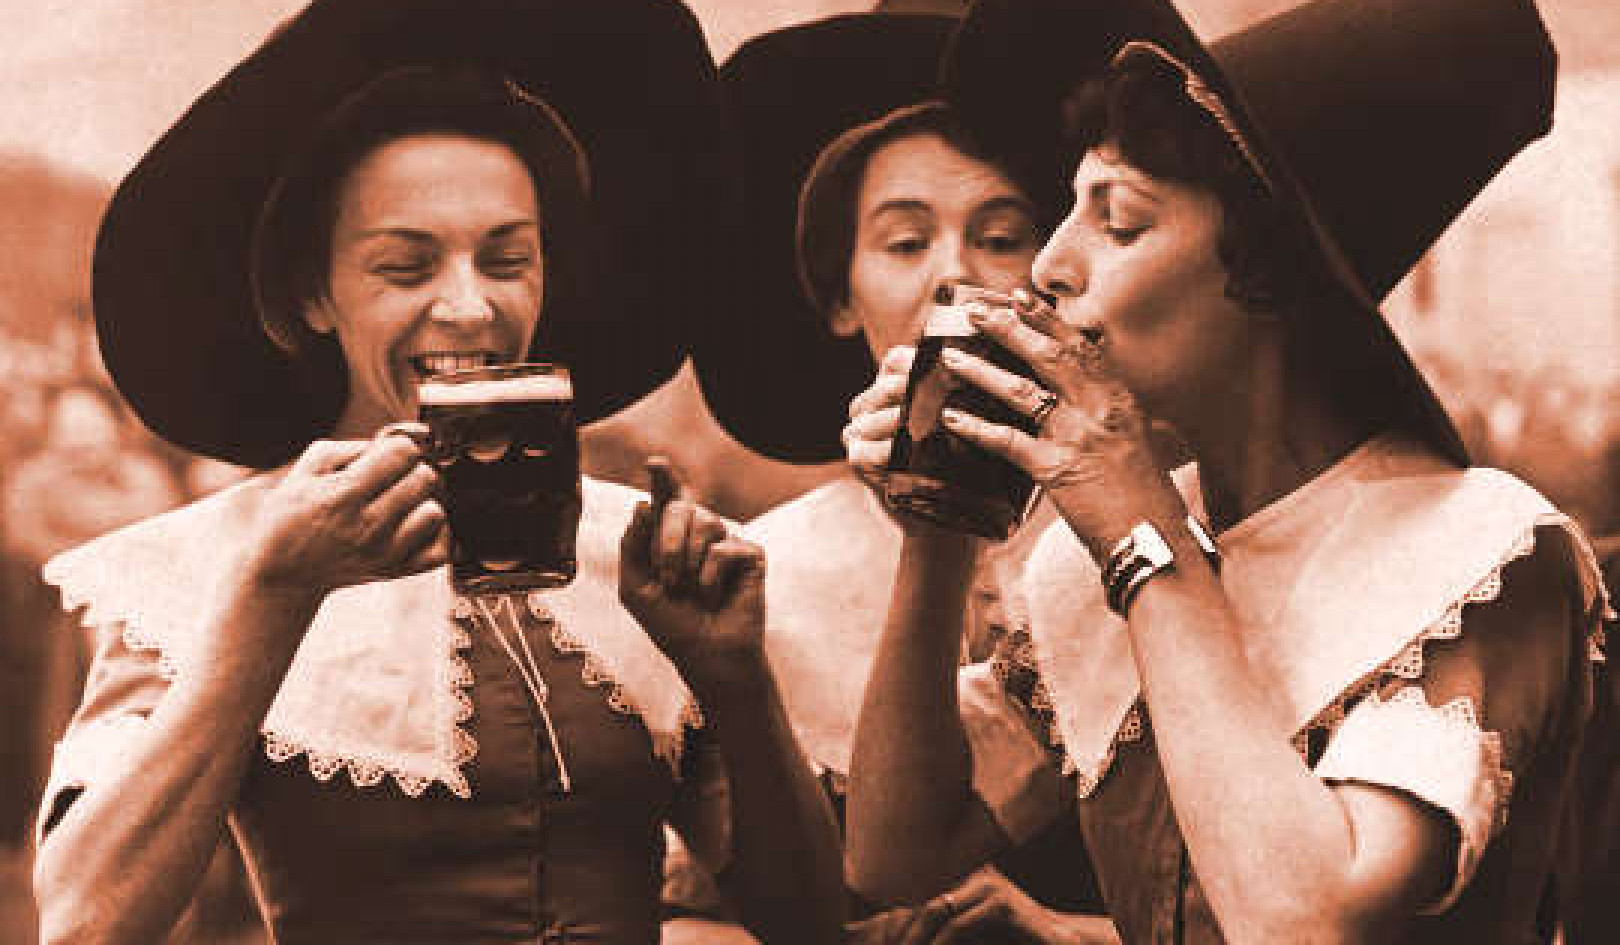 Women Were Beer Makers – Until They Were Persecuted as Witches